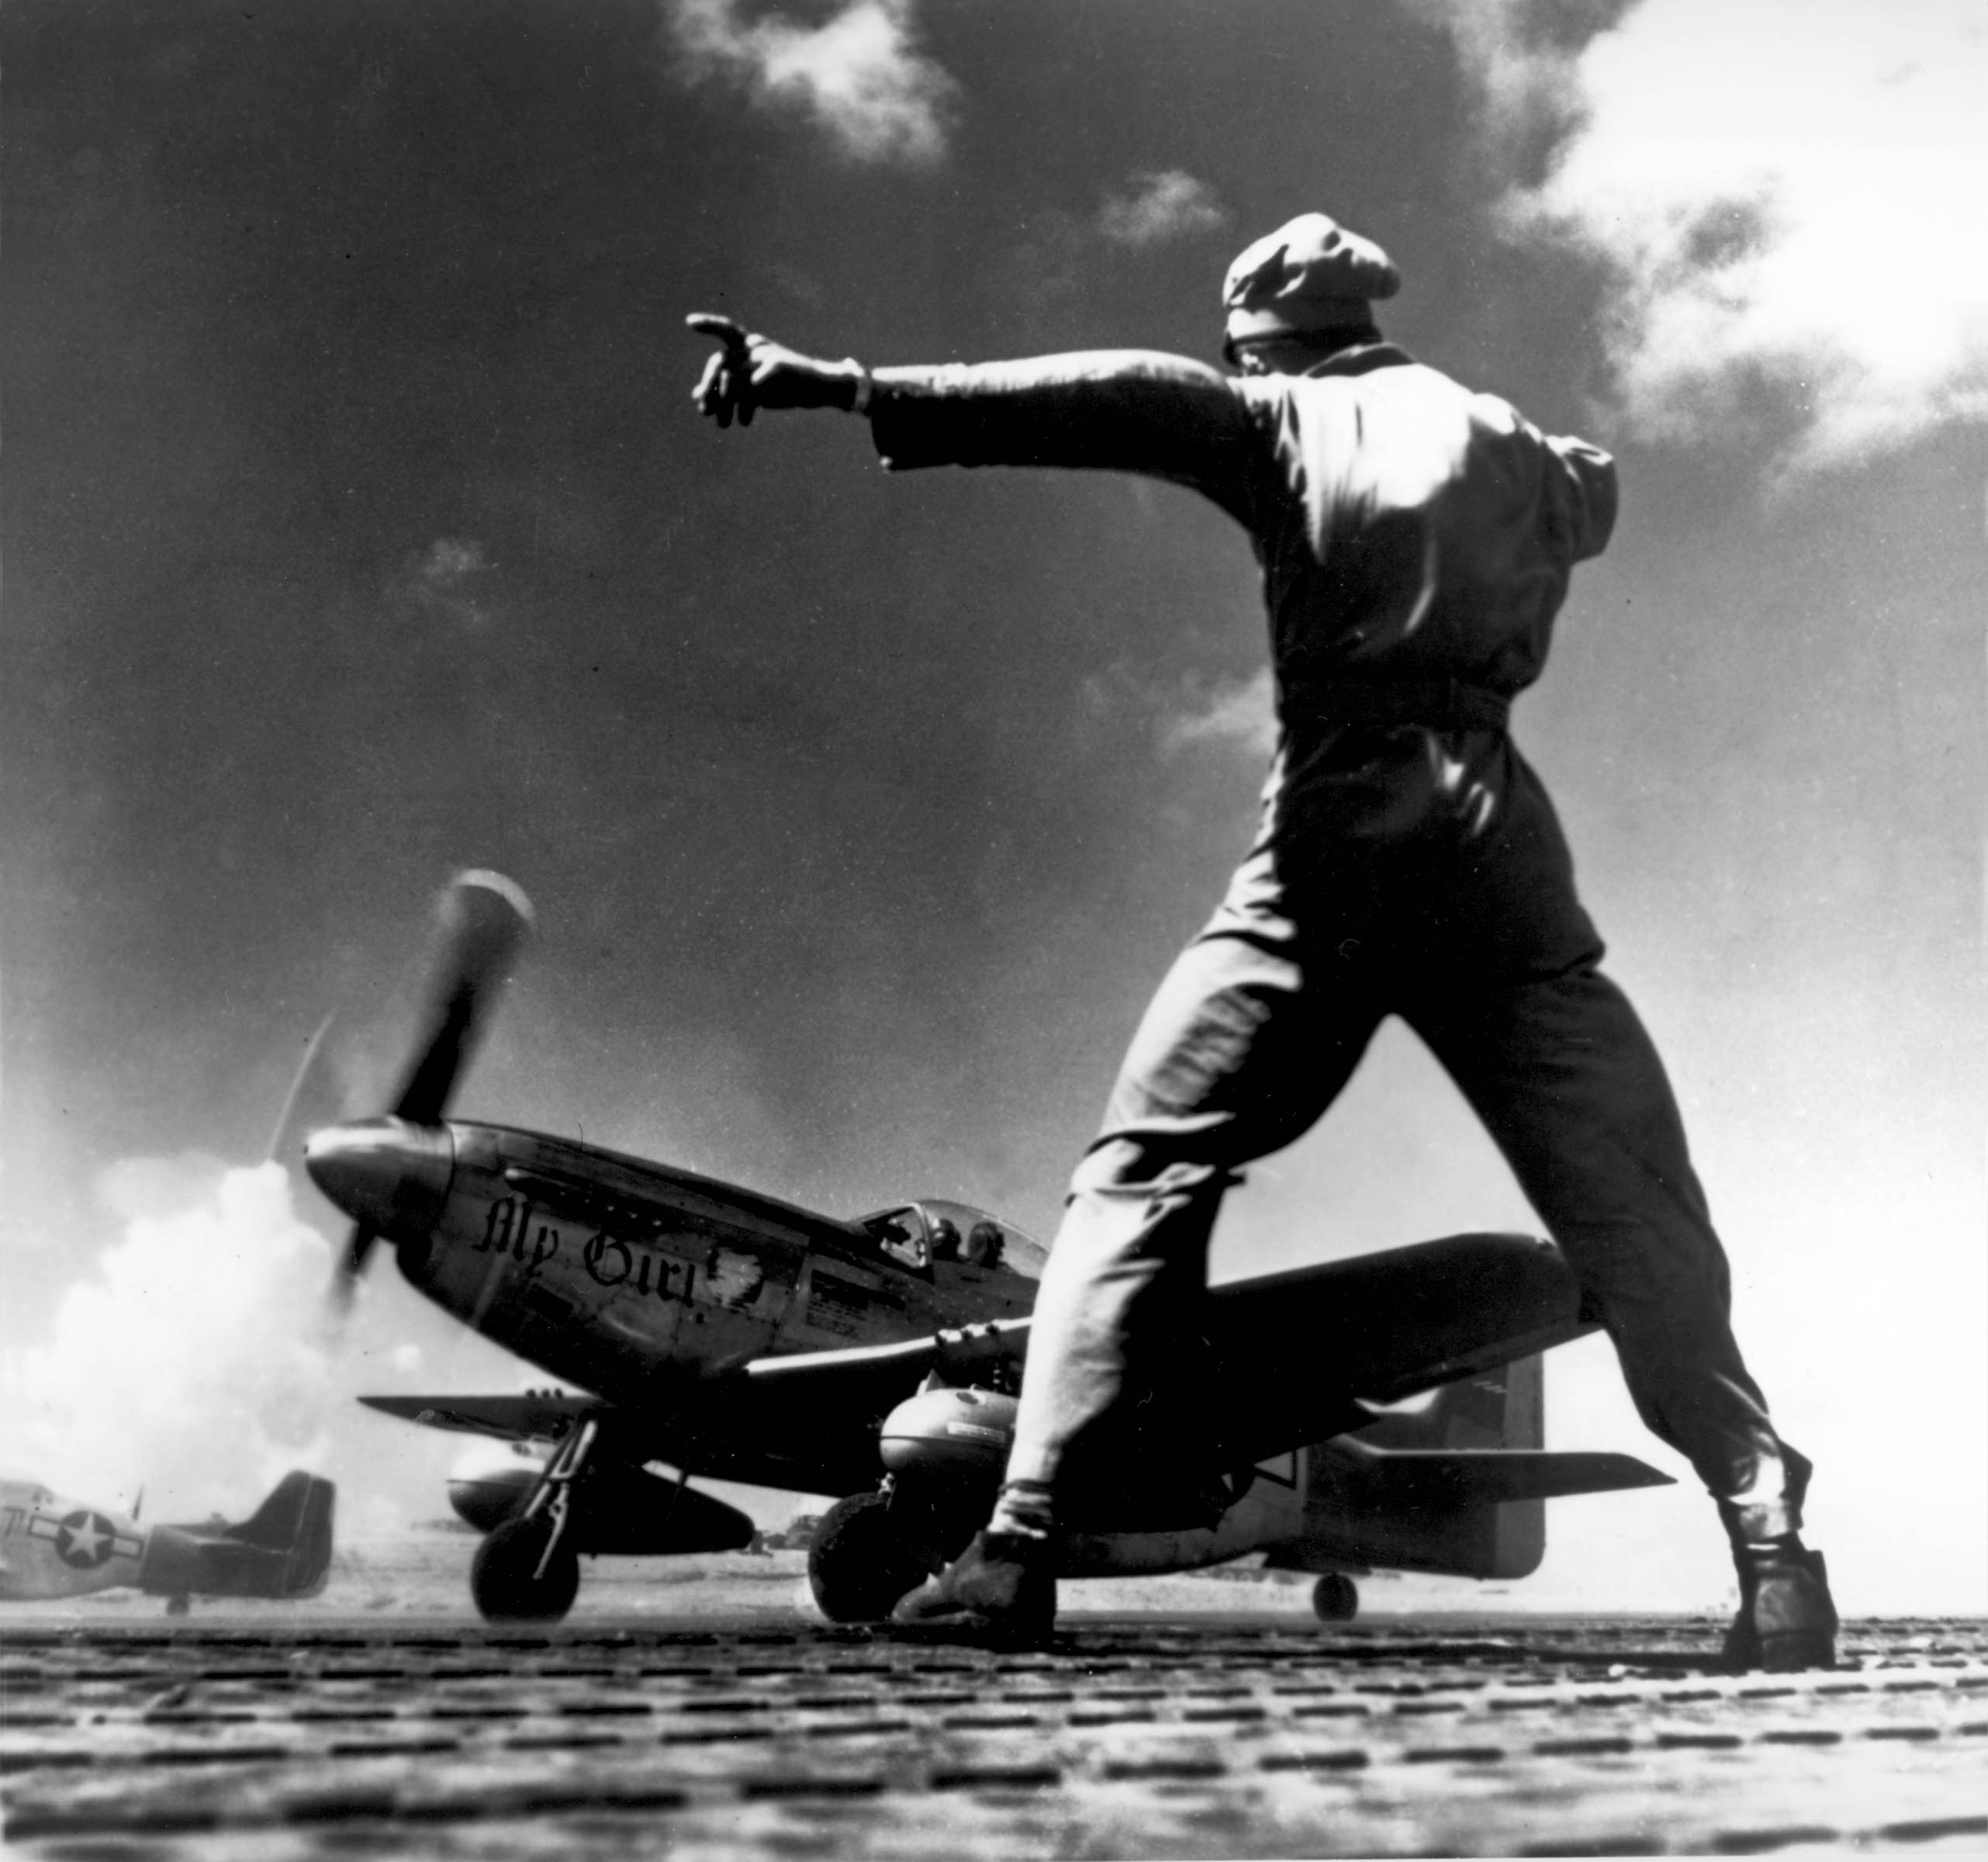 P-51 Mustang fighter 'My Girl' taking off from Iwo Jima, 1945